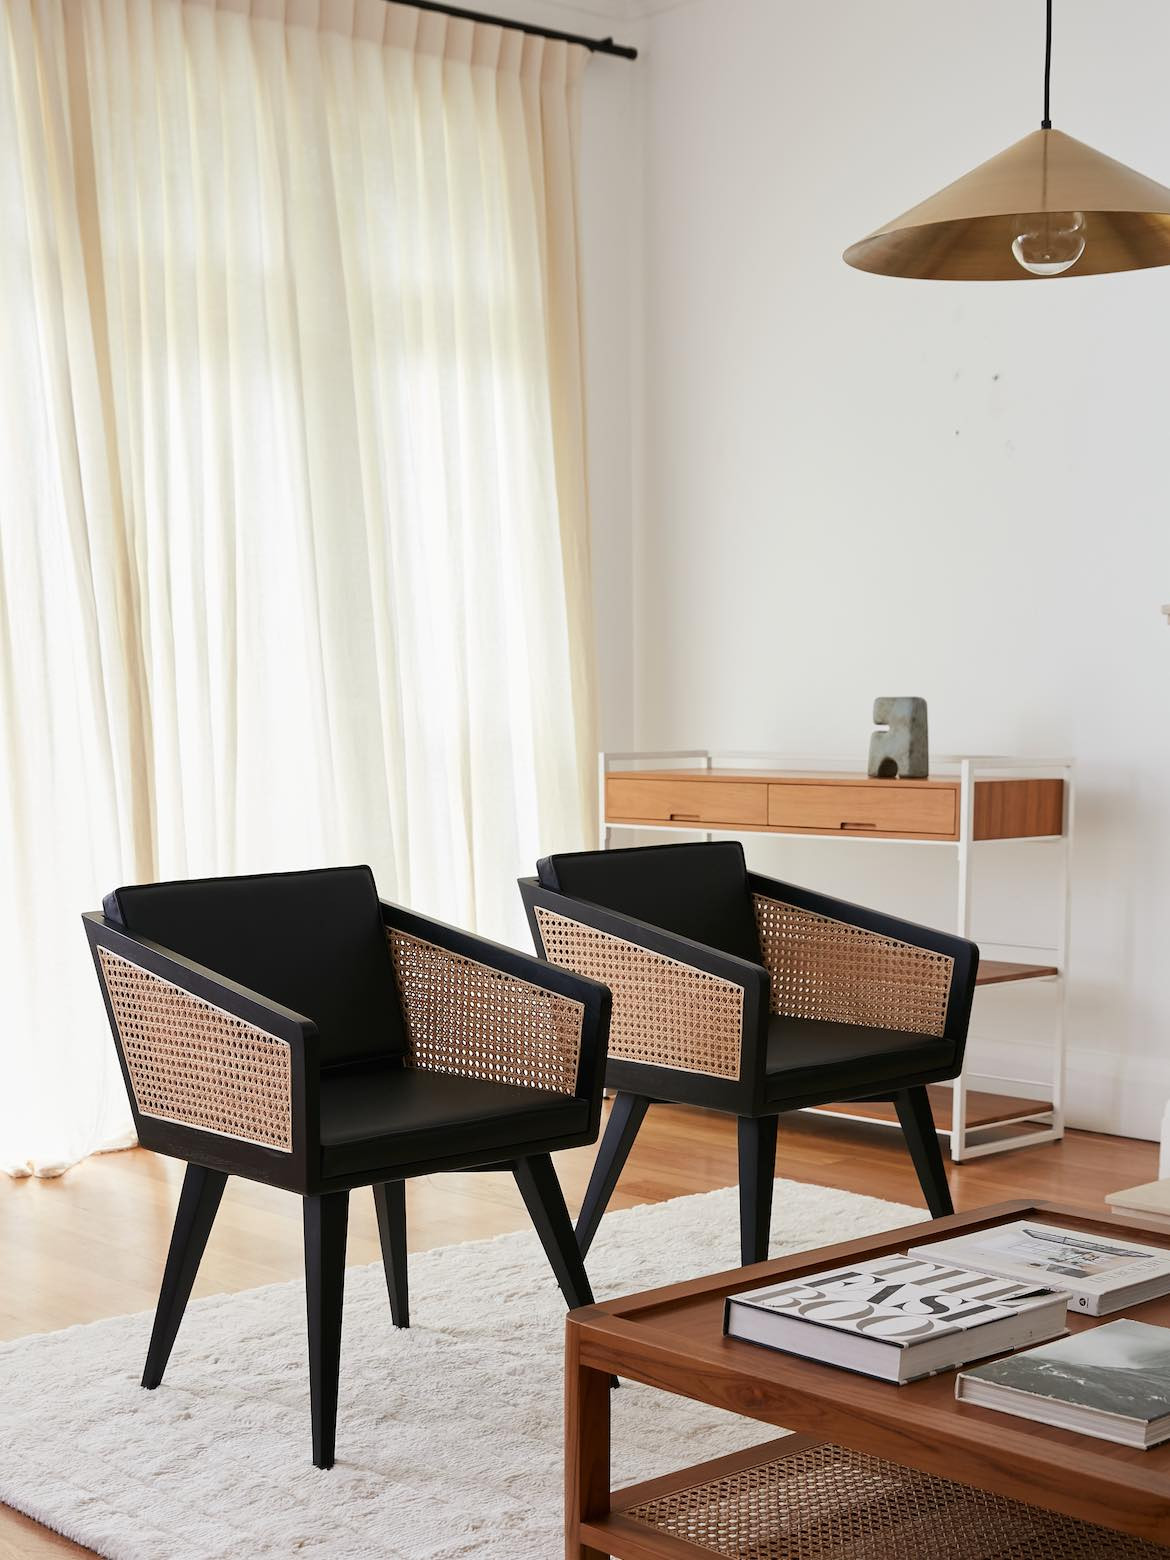 Two angular black chairs with rattan inlays made by Reddie.